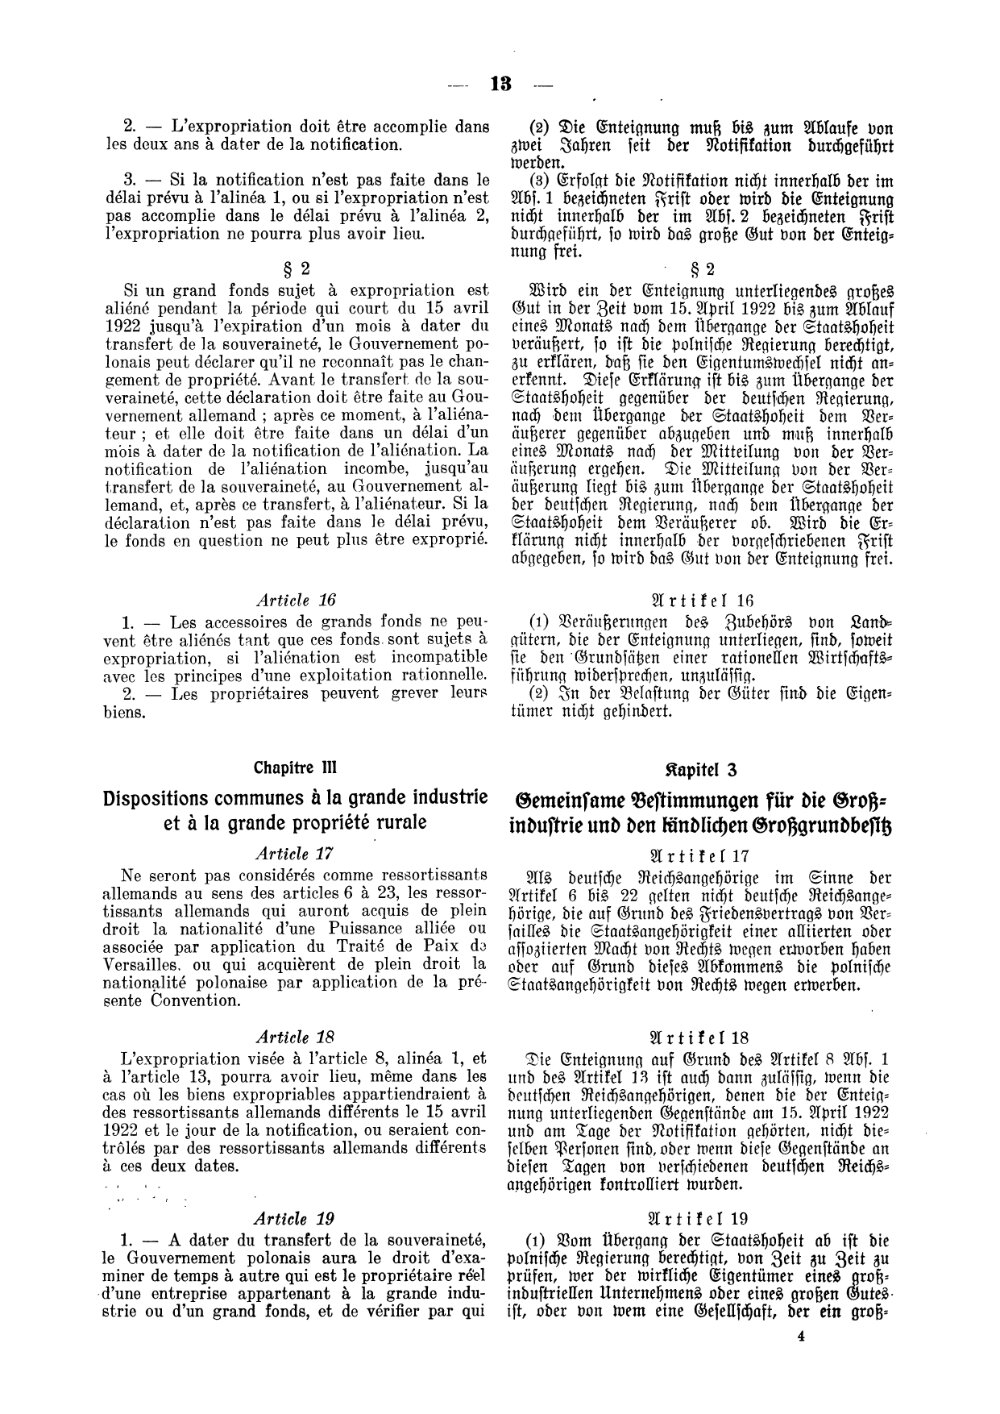 Scan of page 13